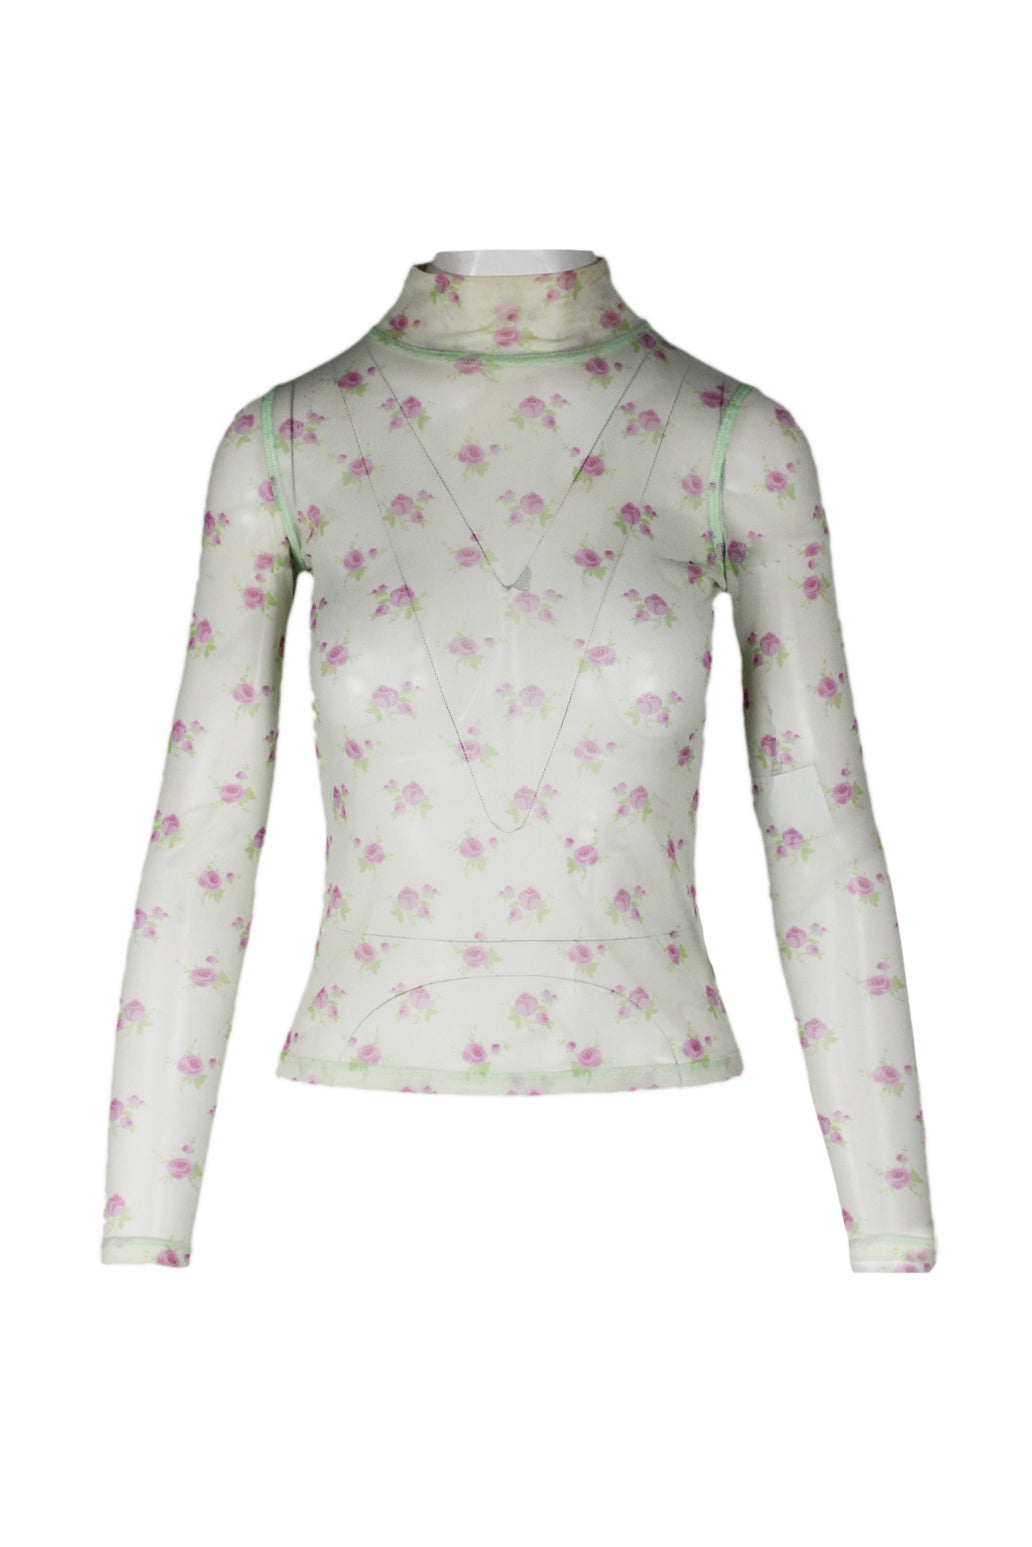 description: sandy liang green and pink floral mesh top. features turtle neck, long sleeves, fitted style, and straight bottom hem. 